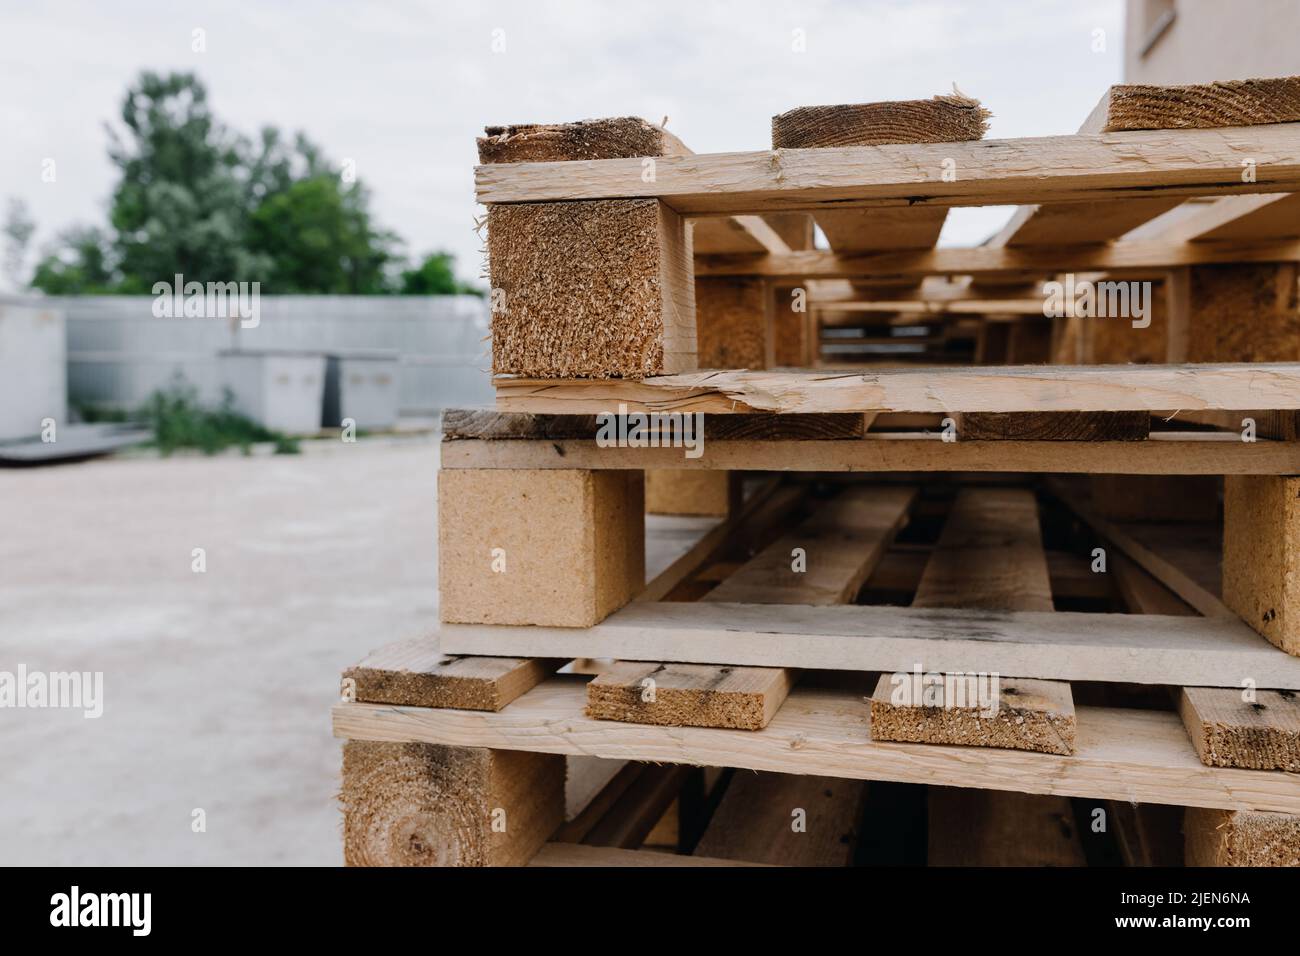 Wooden pallets lie on top of each other on the street. Close up Stock Photo